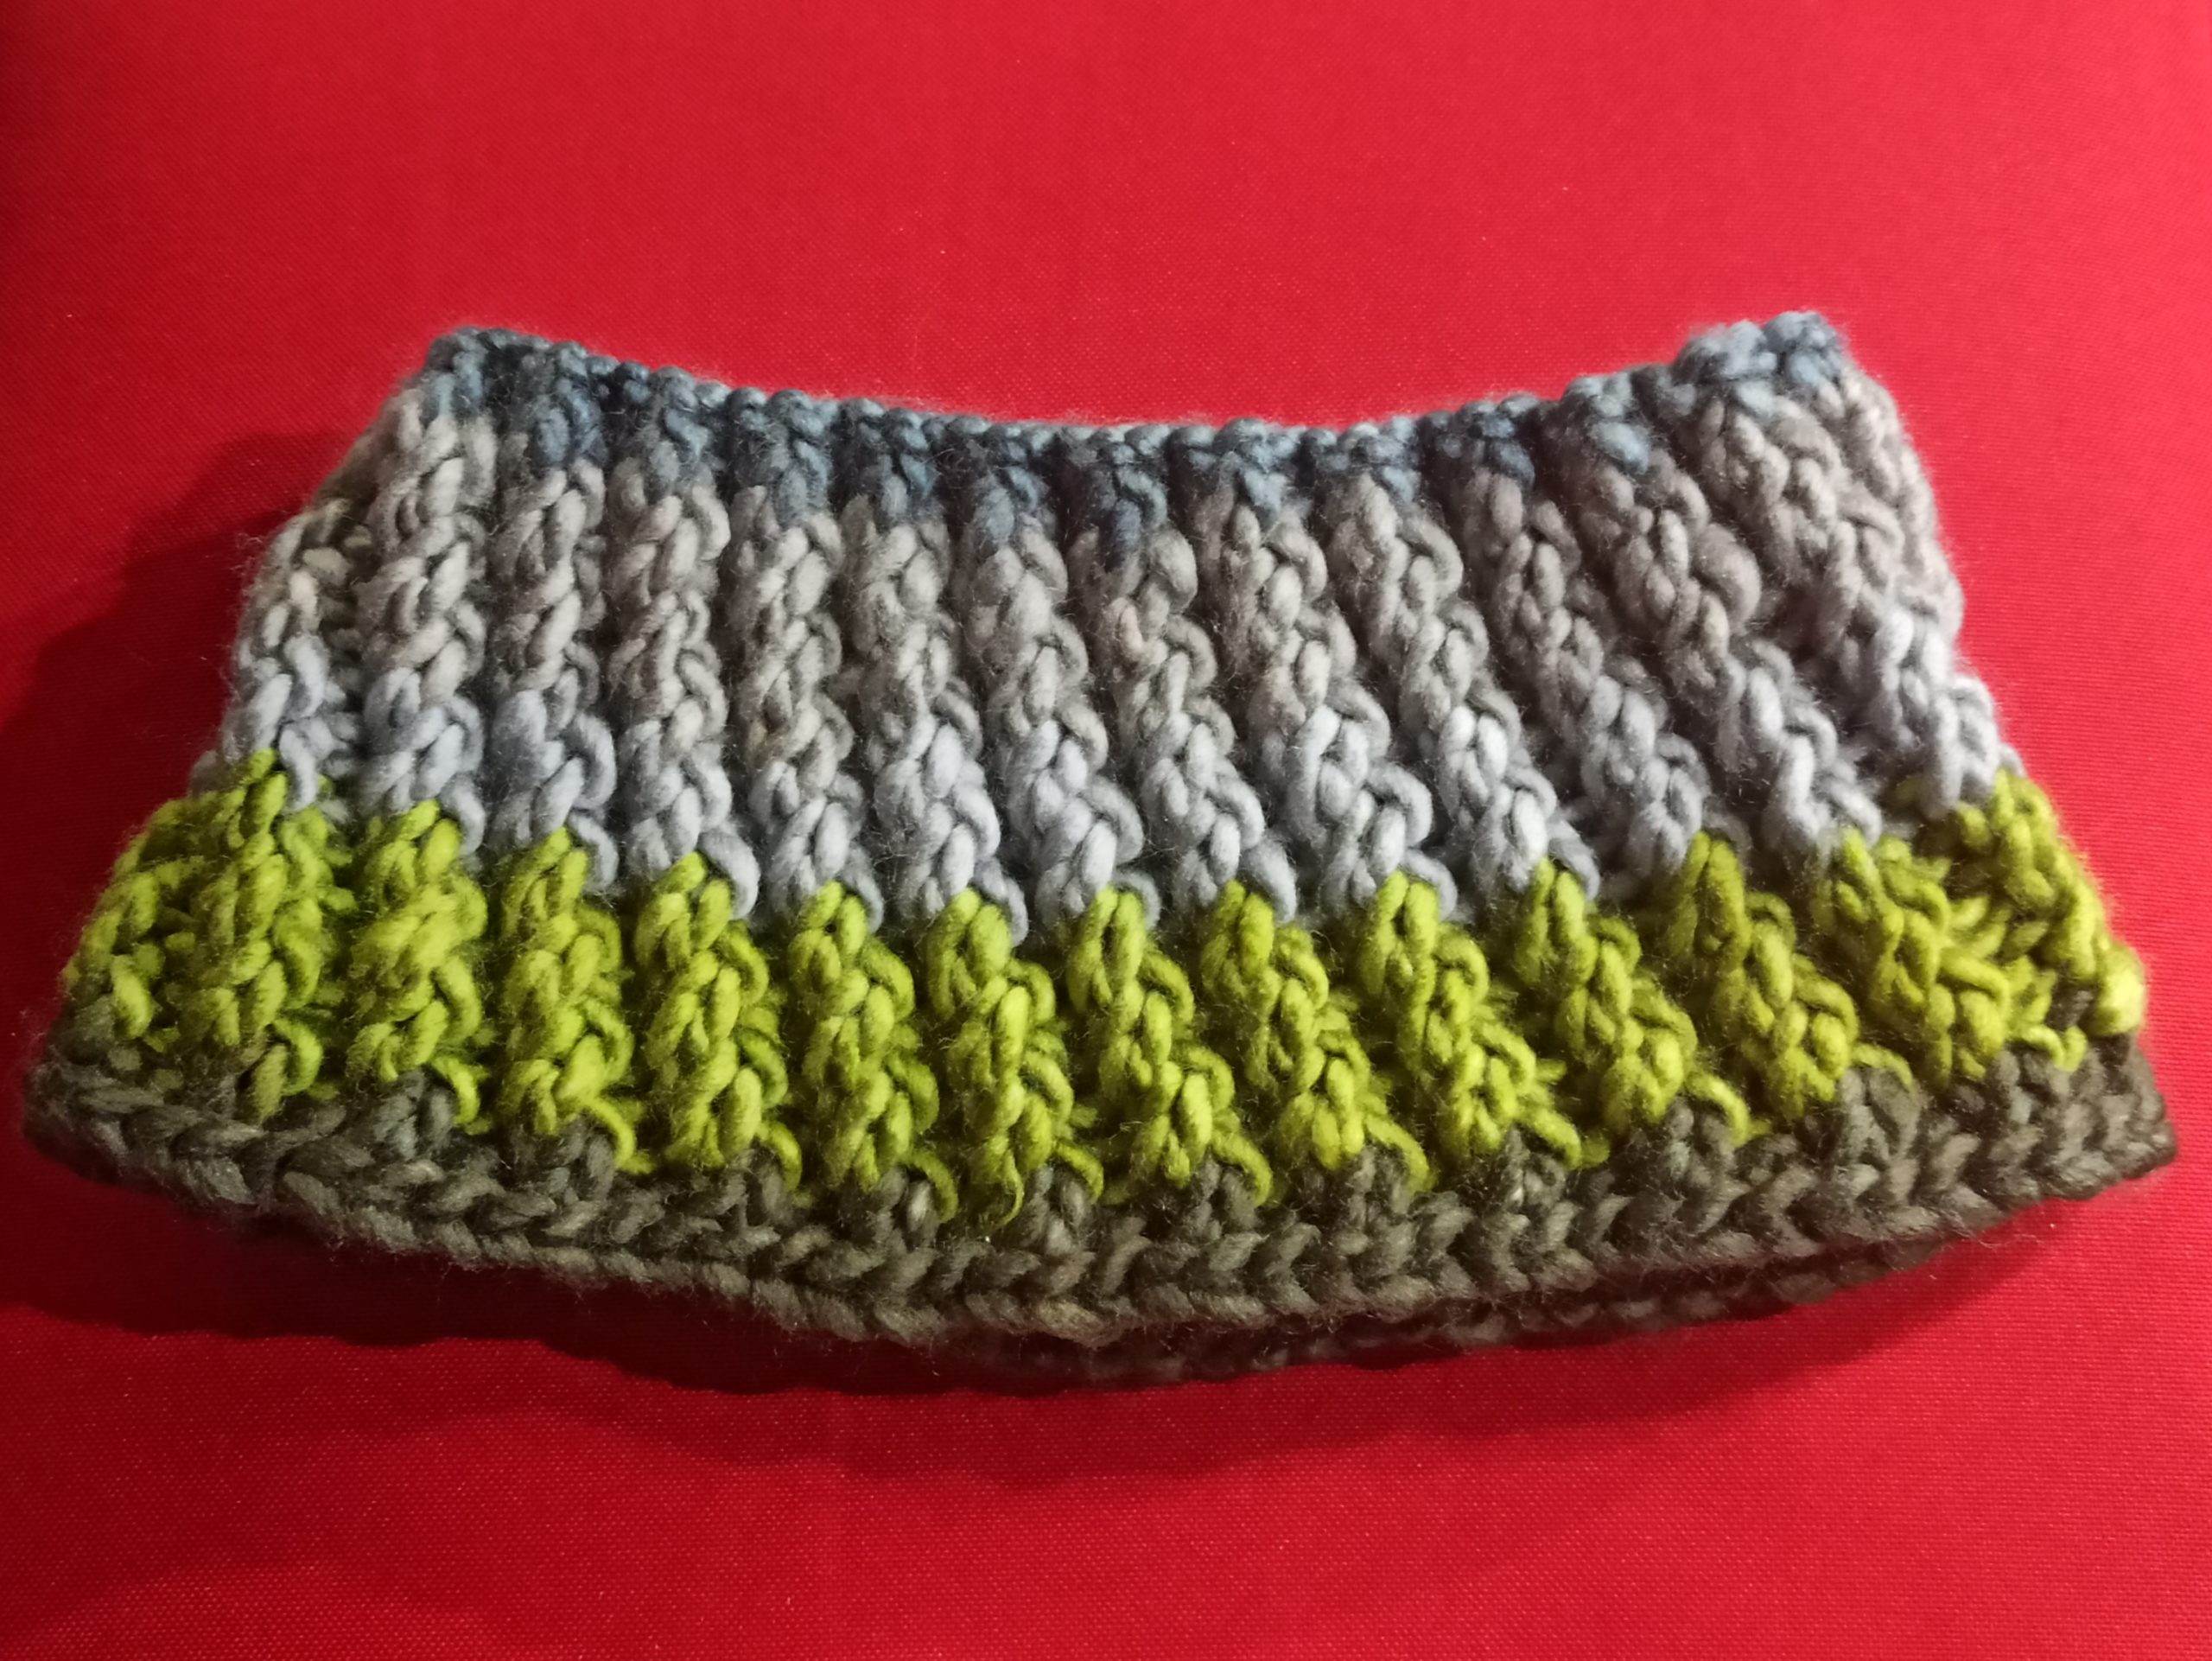 The knit before Christmas - Cowl 4